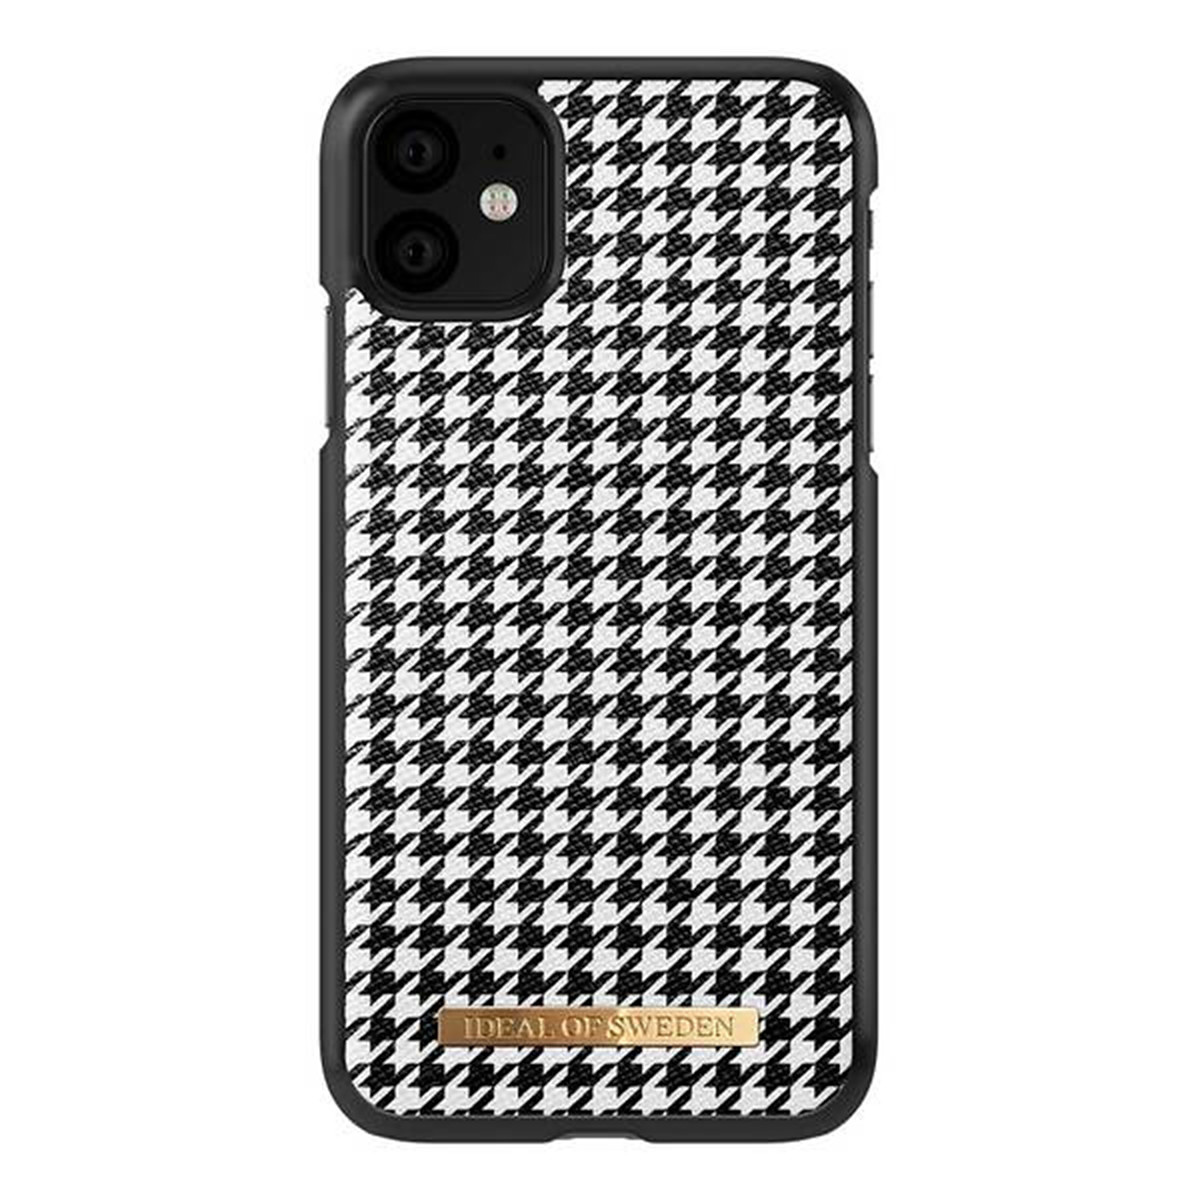 iDeal Fashion Case, iPhone 11 Pro, Houndstooth